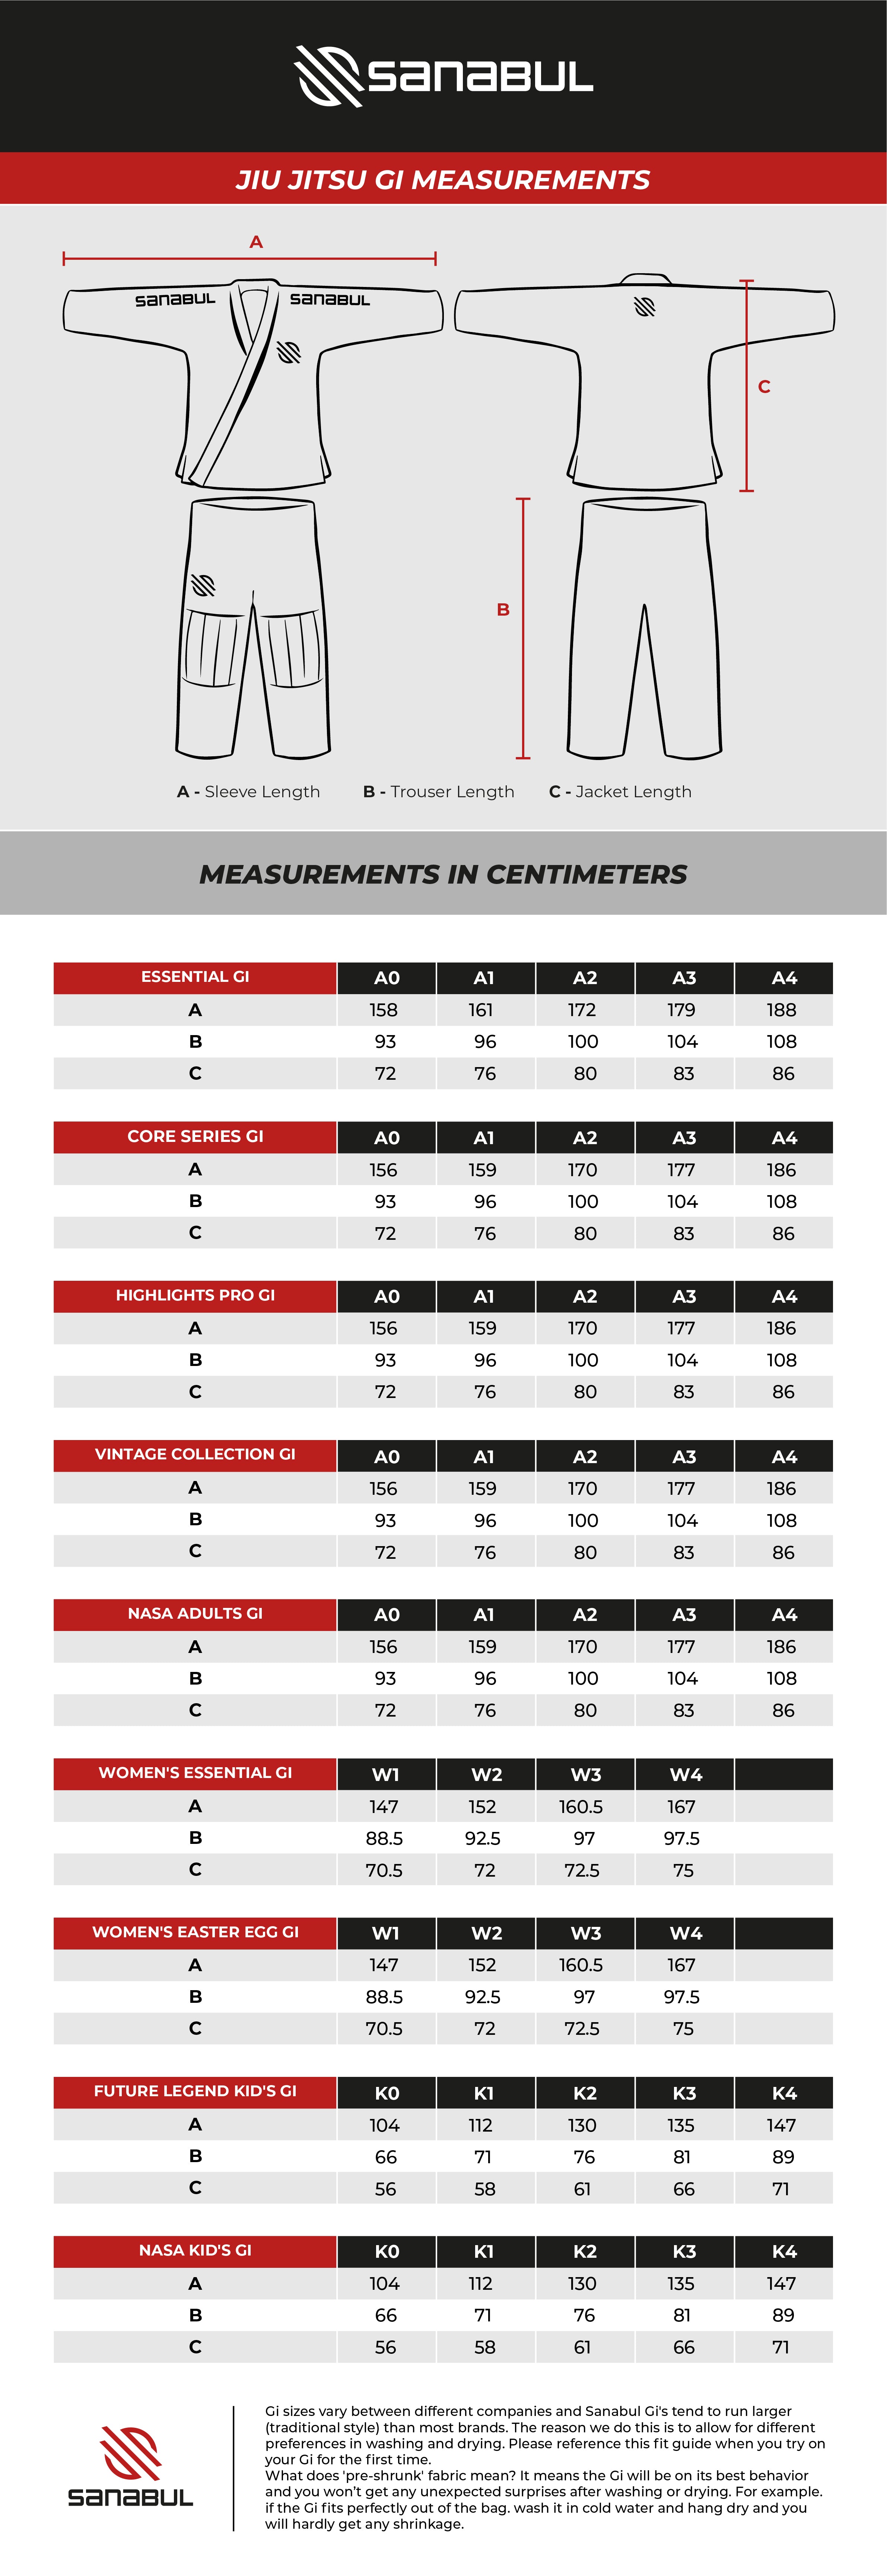 Gi Sizing Guide and Fit Guide | Sanabul